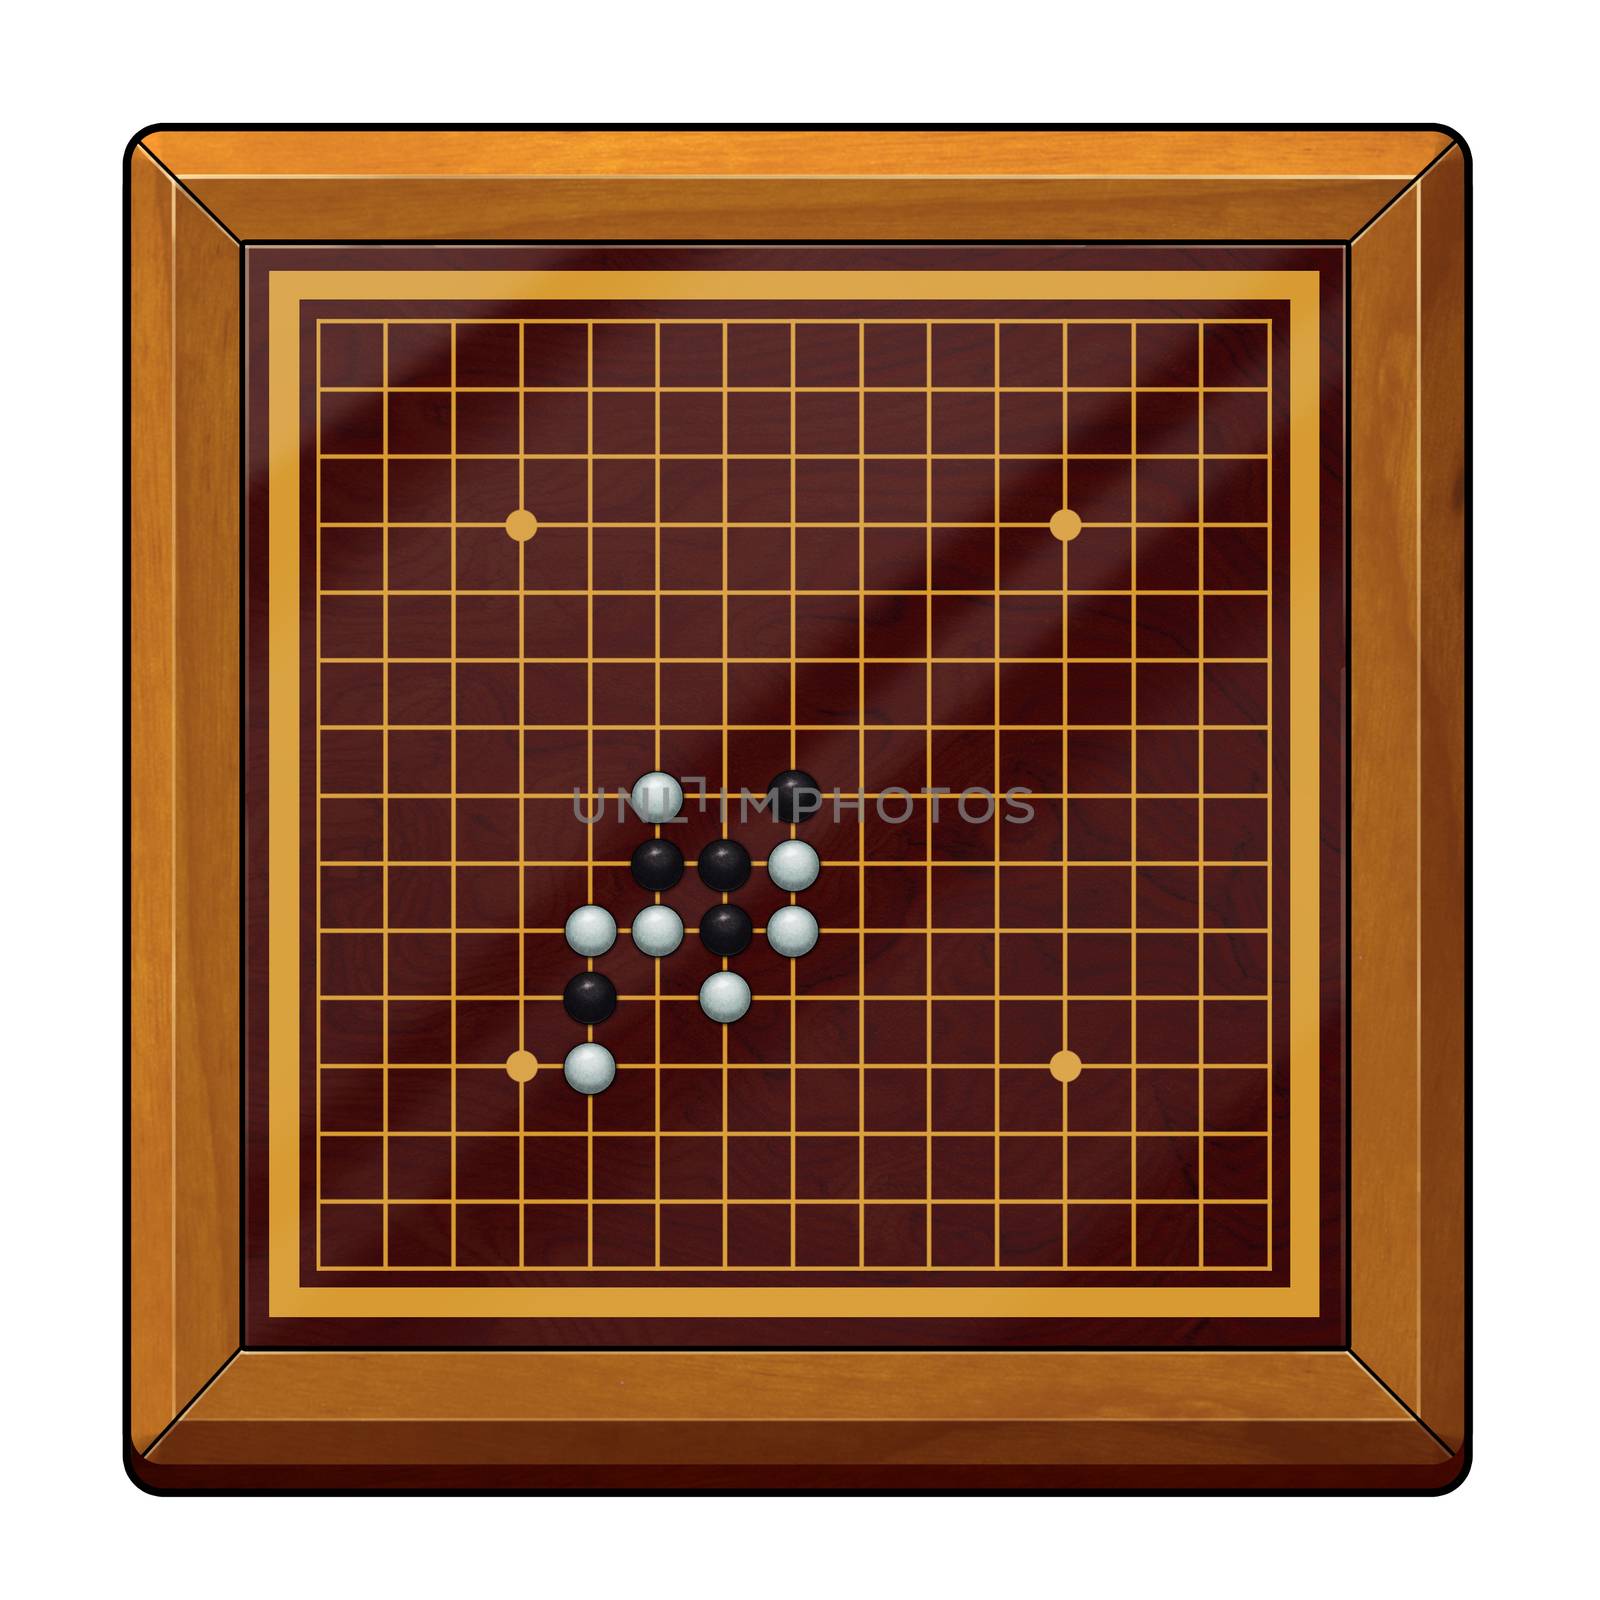 Illustration: Go Game, Gomoku Chess, Renju Chess Related: Chess Pieces, Chess Board, etc. Fantastic Cartoon Style Game Element Design.